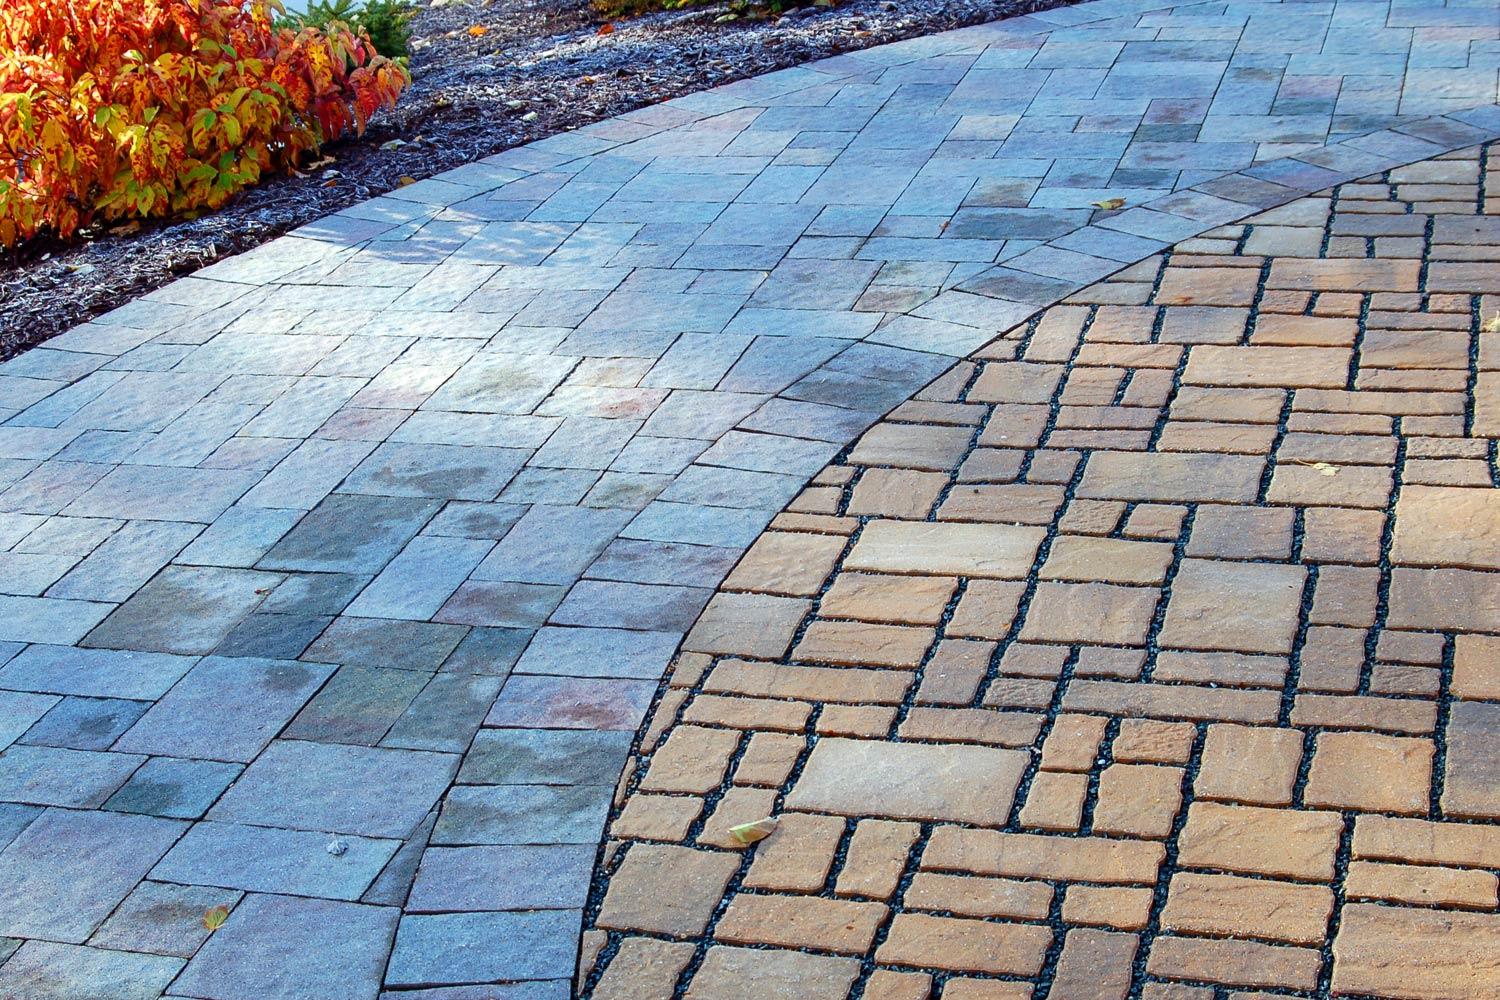 Permeable paver patio with contrasting paver textures and styles.